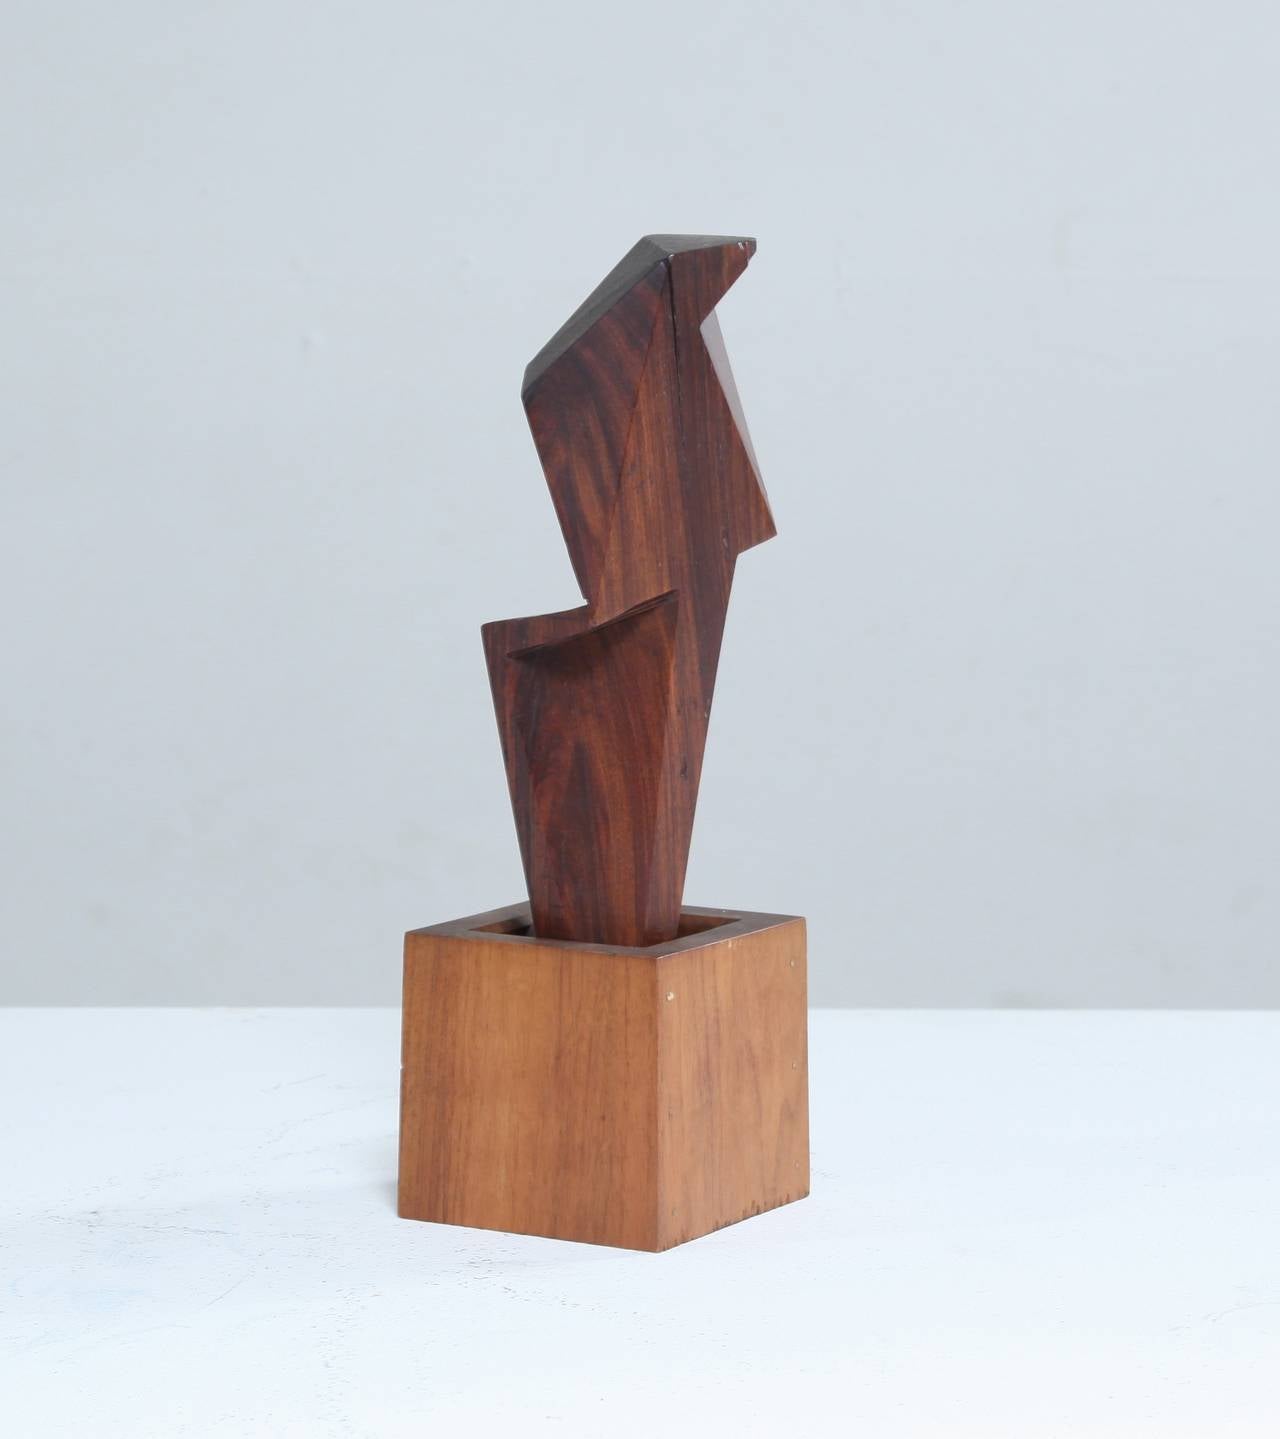 A small cubist sculpture in wood by David E. Rogers.

Dr. David Elliott Rogers (1926-1994) was, amongst other functions, co-chairman of the National Commission on AIDS. Apart from his medical work, Rogers was an accomplished woodworker and